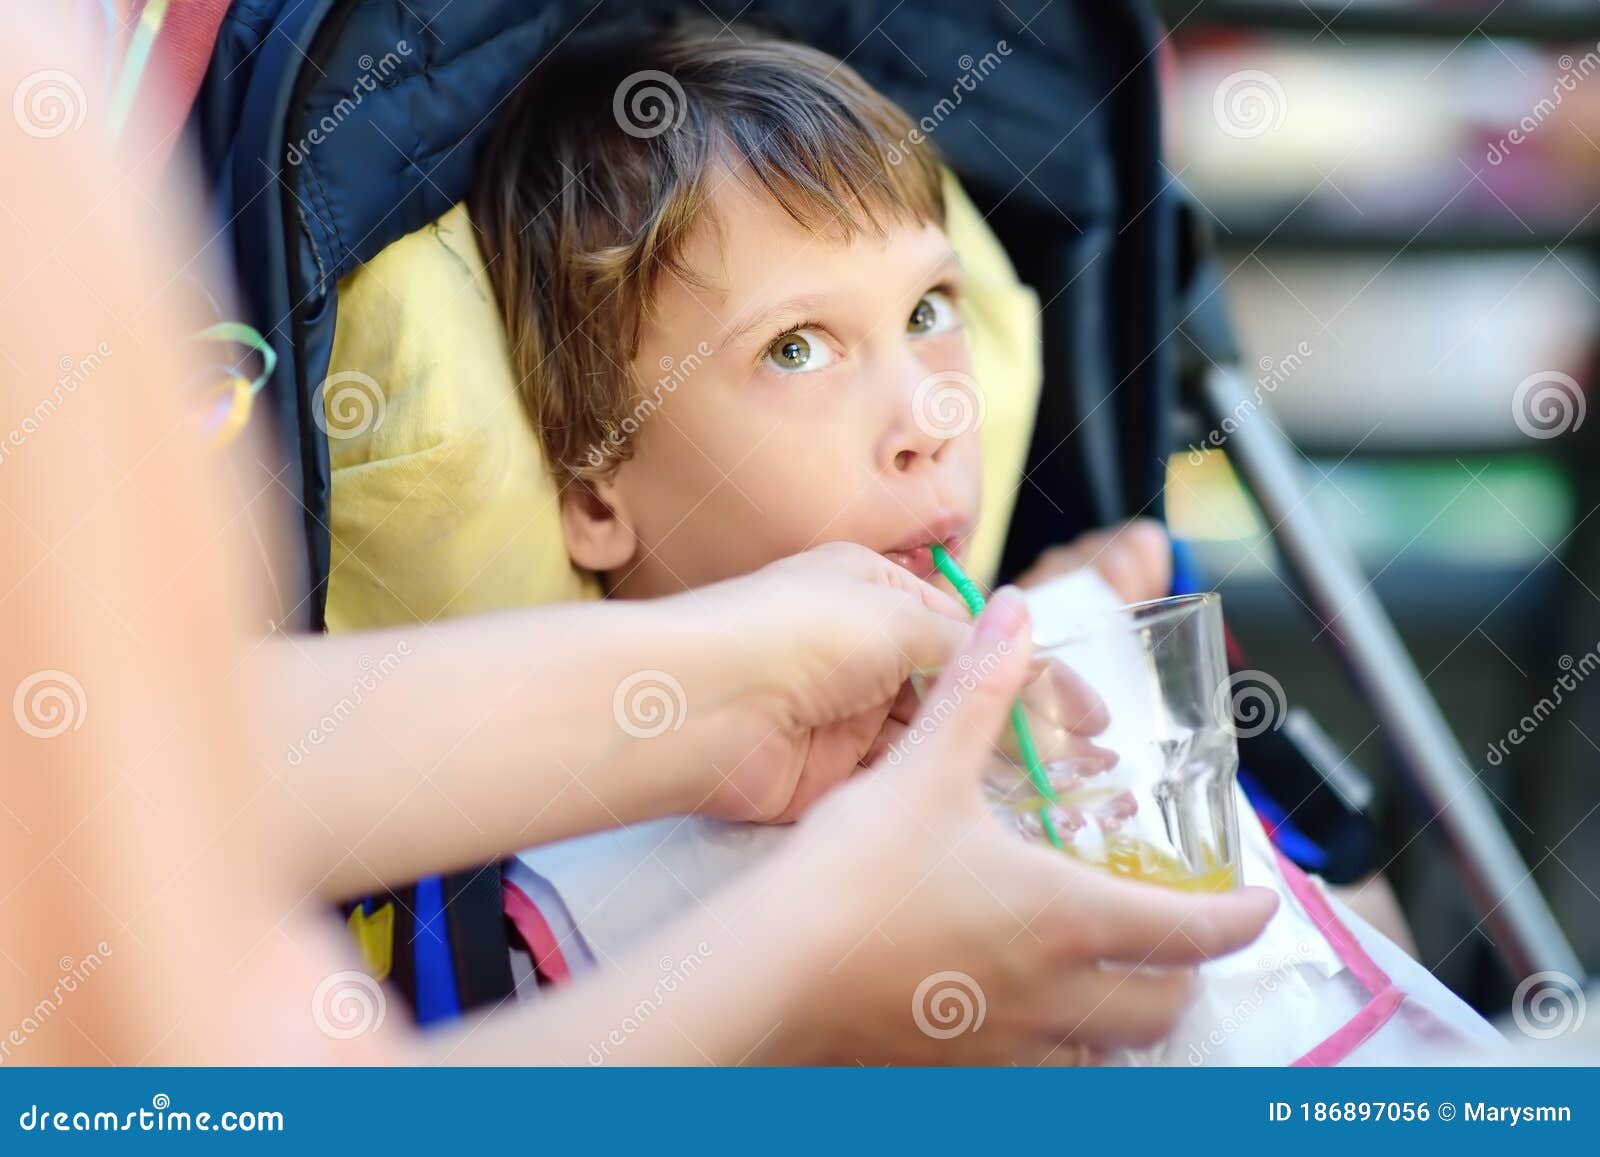 Mother Giving Disabled Child A Drink. Cute Little Girl ...